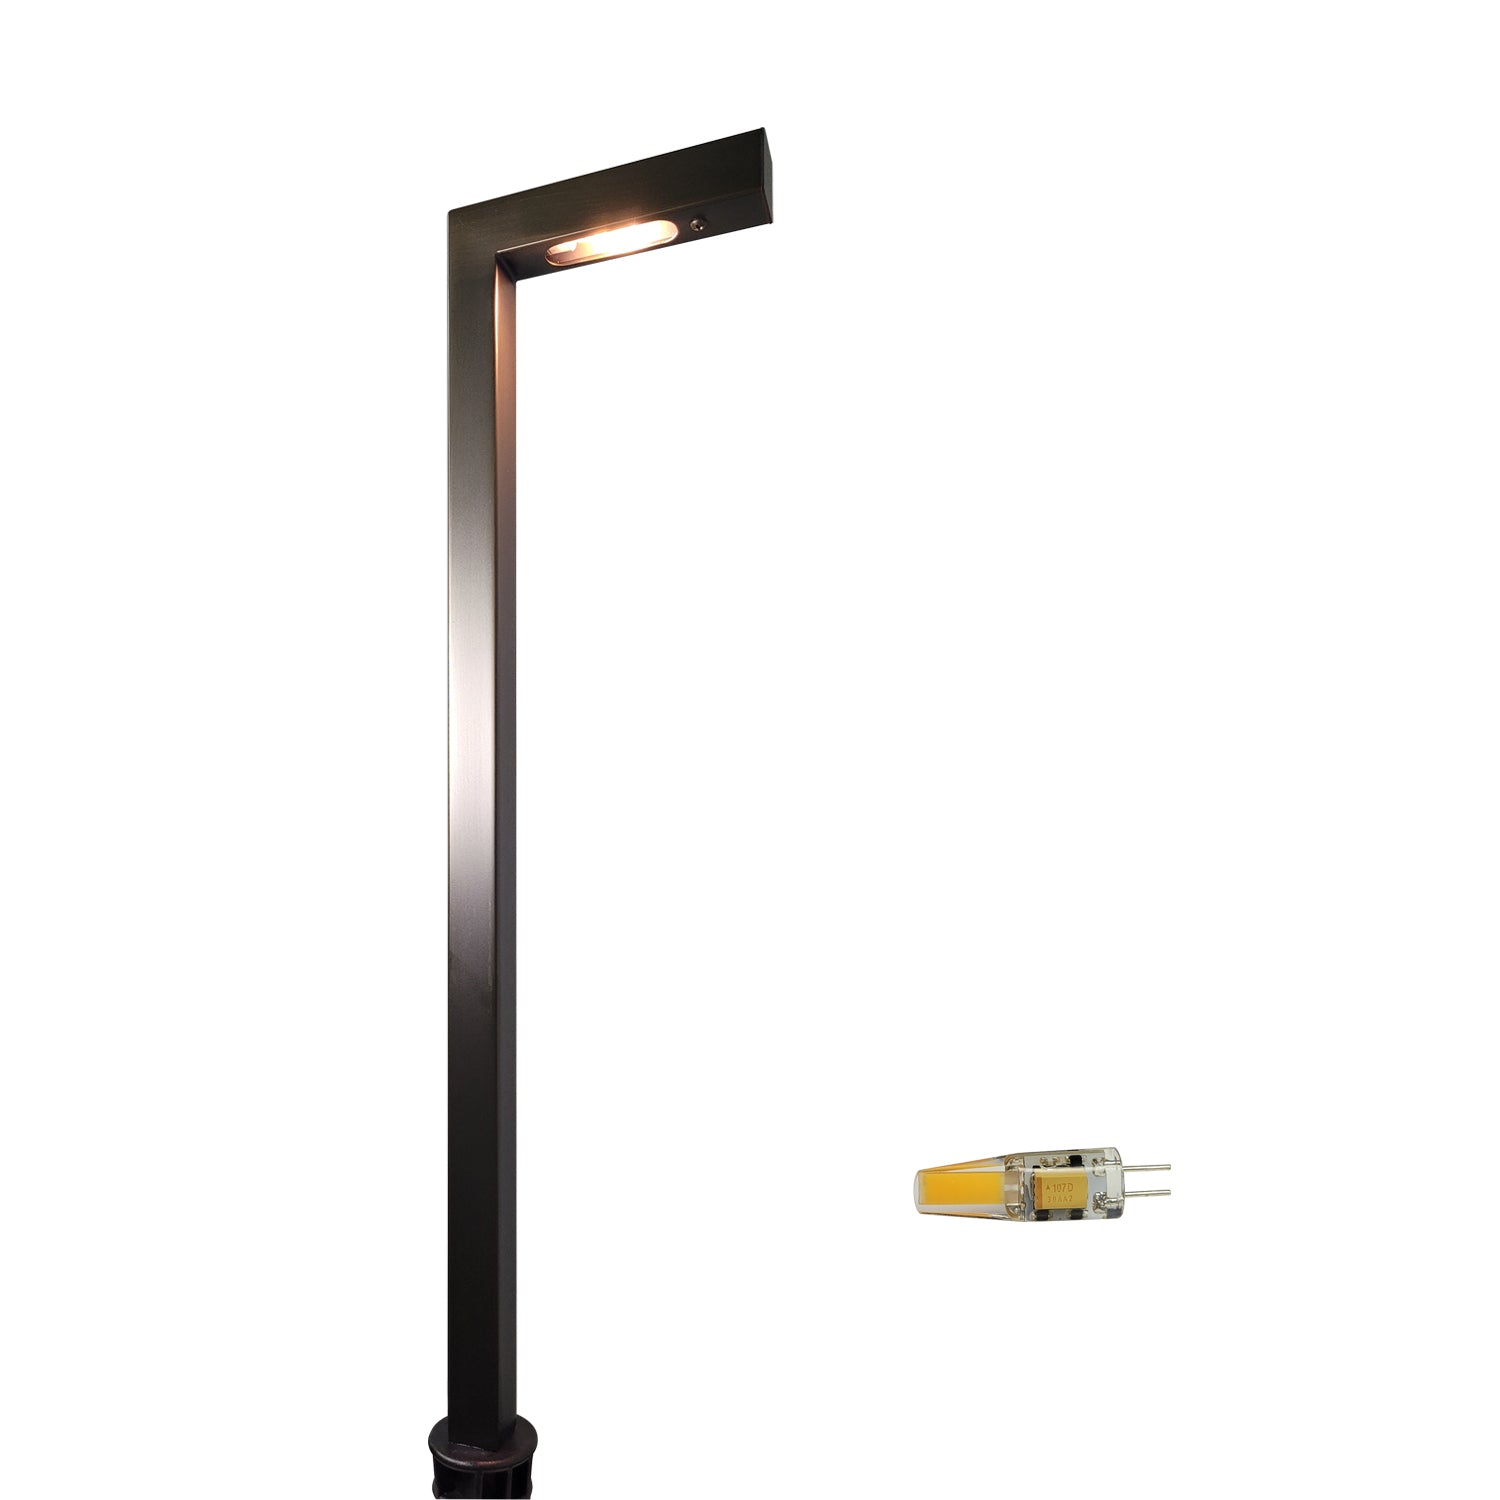 Solid brass low voltage outdoor pathway light with LED bulb, durable and waterproof, ideal for landscape lighting